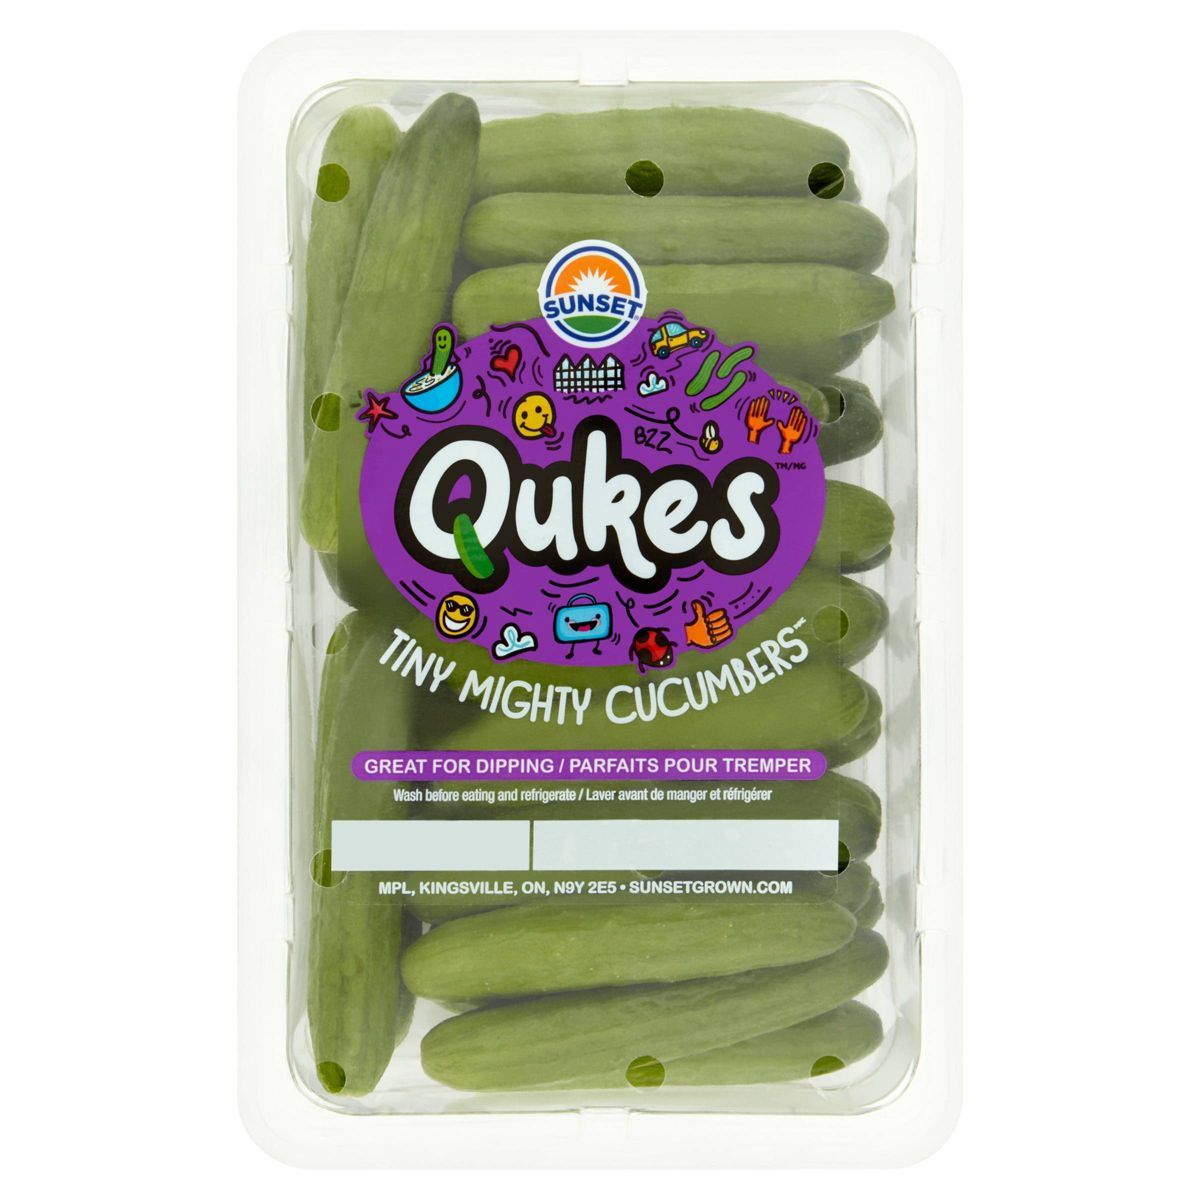 Sunset Qukes Tiny Mighty Cucumbers - 12oz | Target